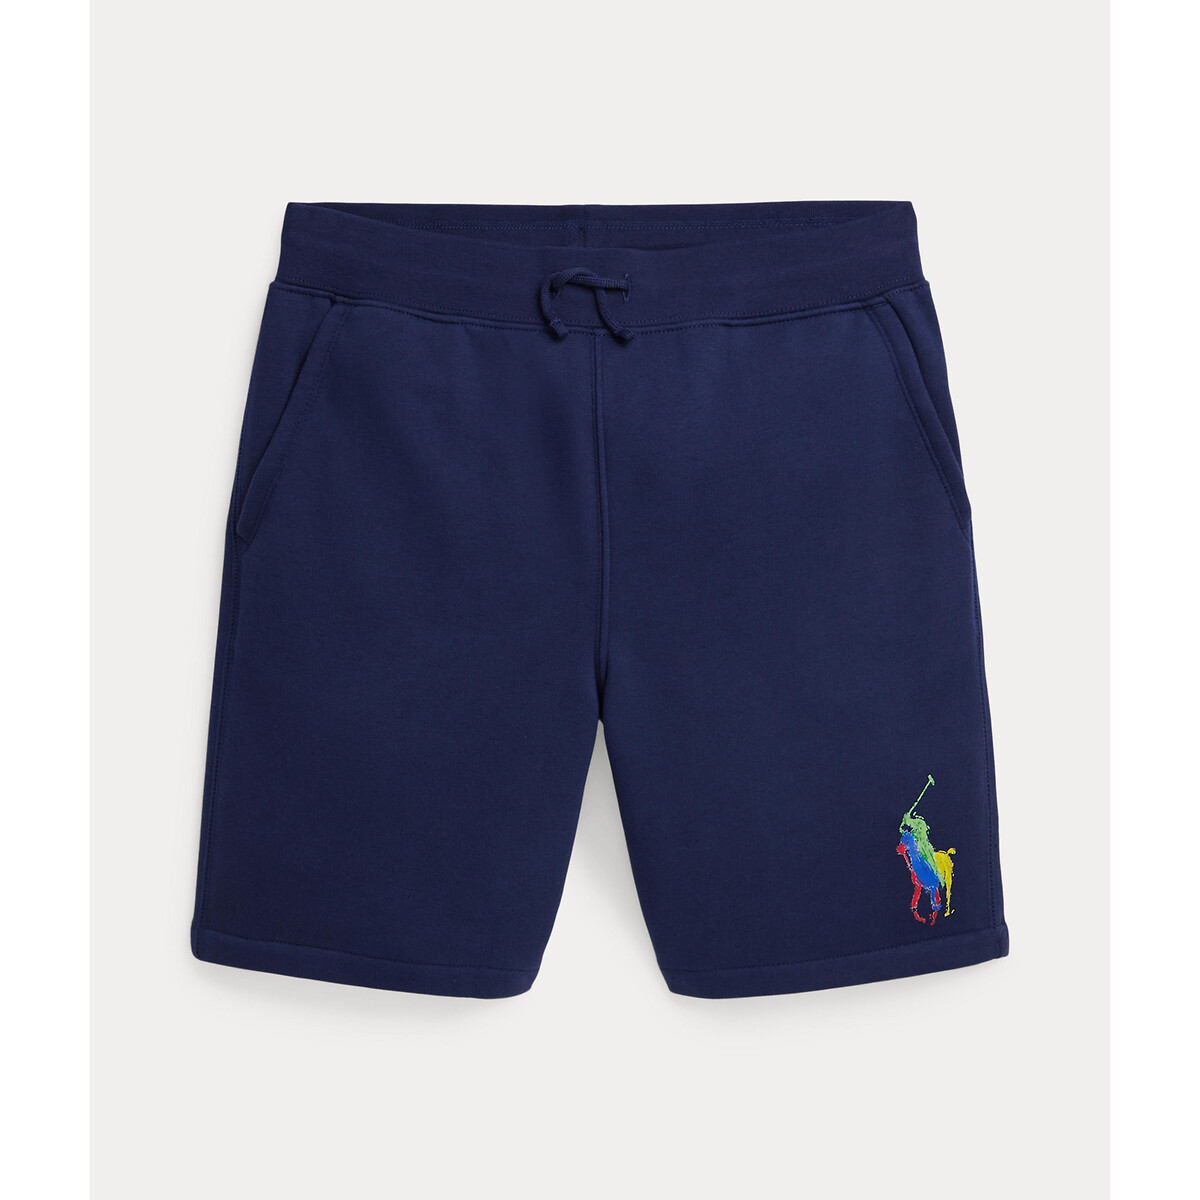 Image of Big Pony Fleece Shorts in Cotton Mix